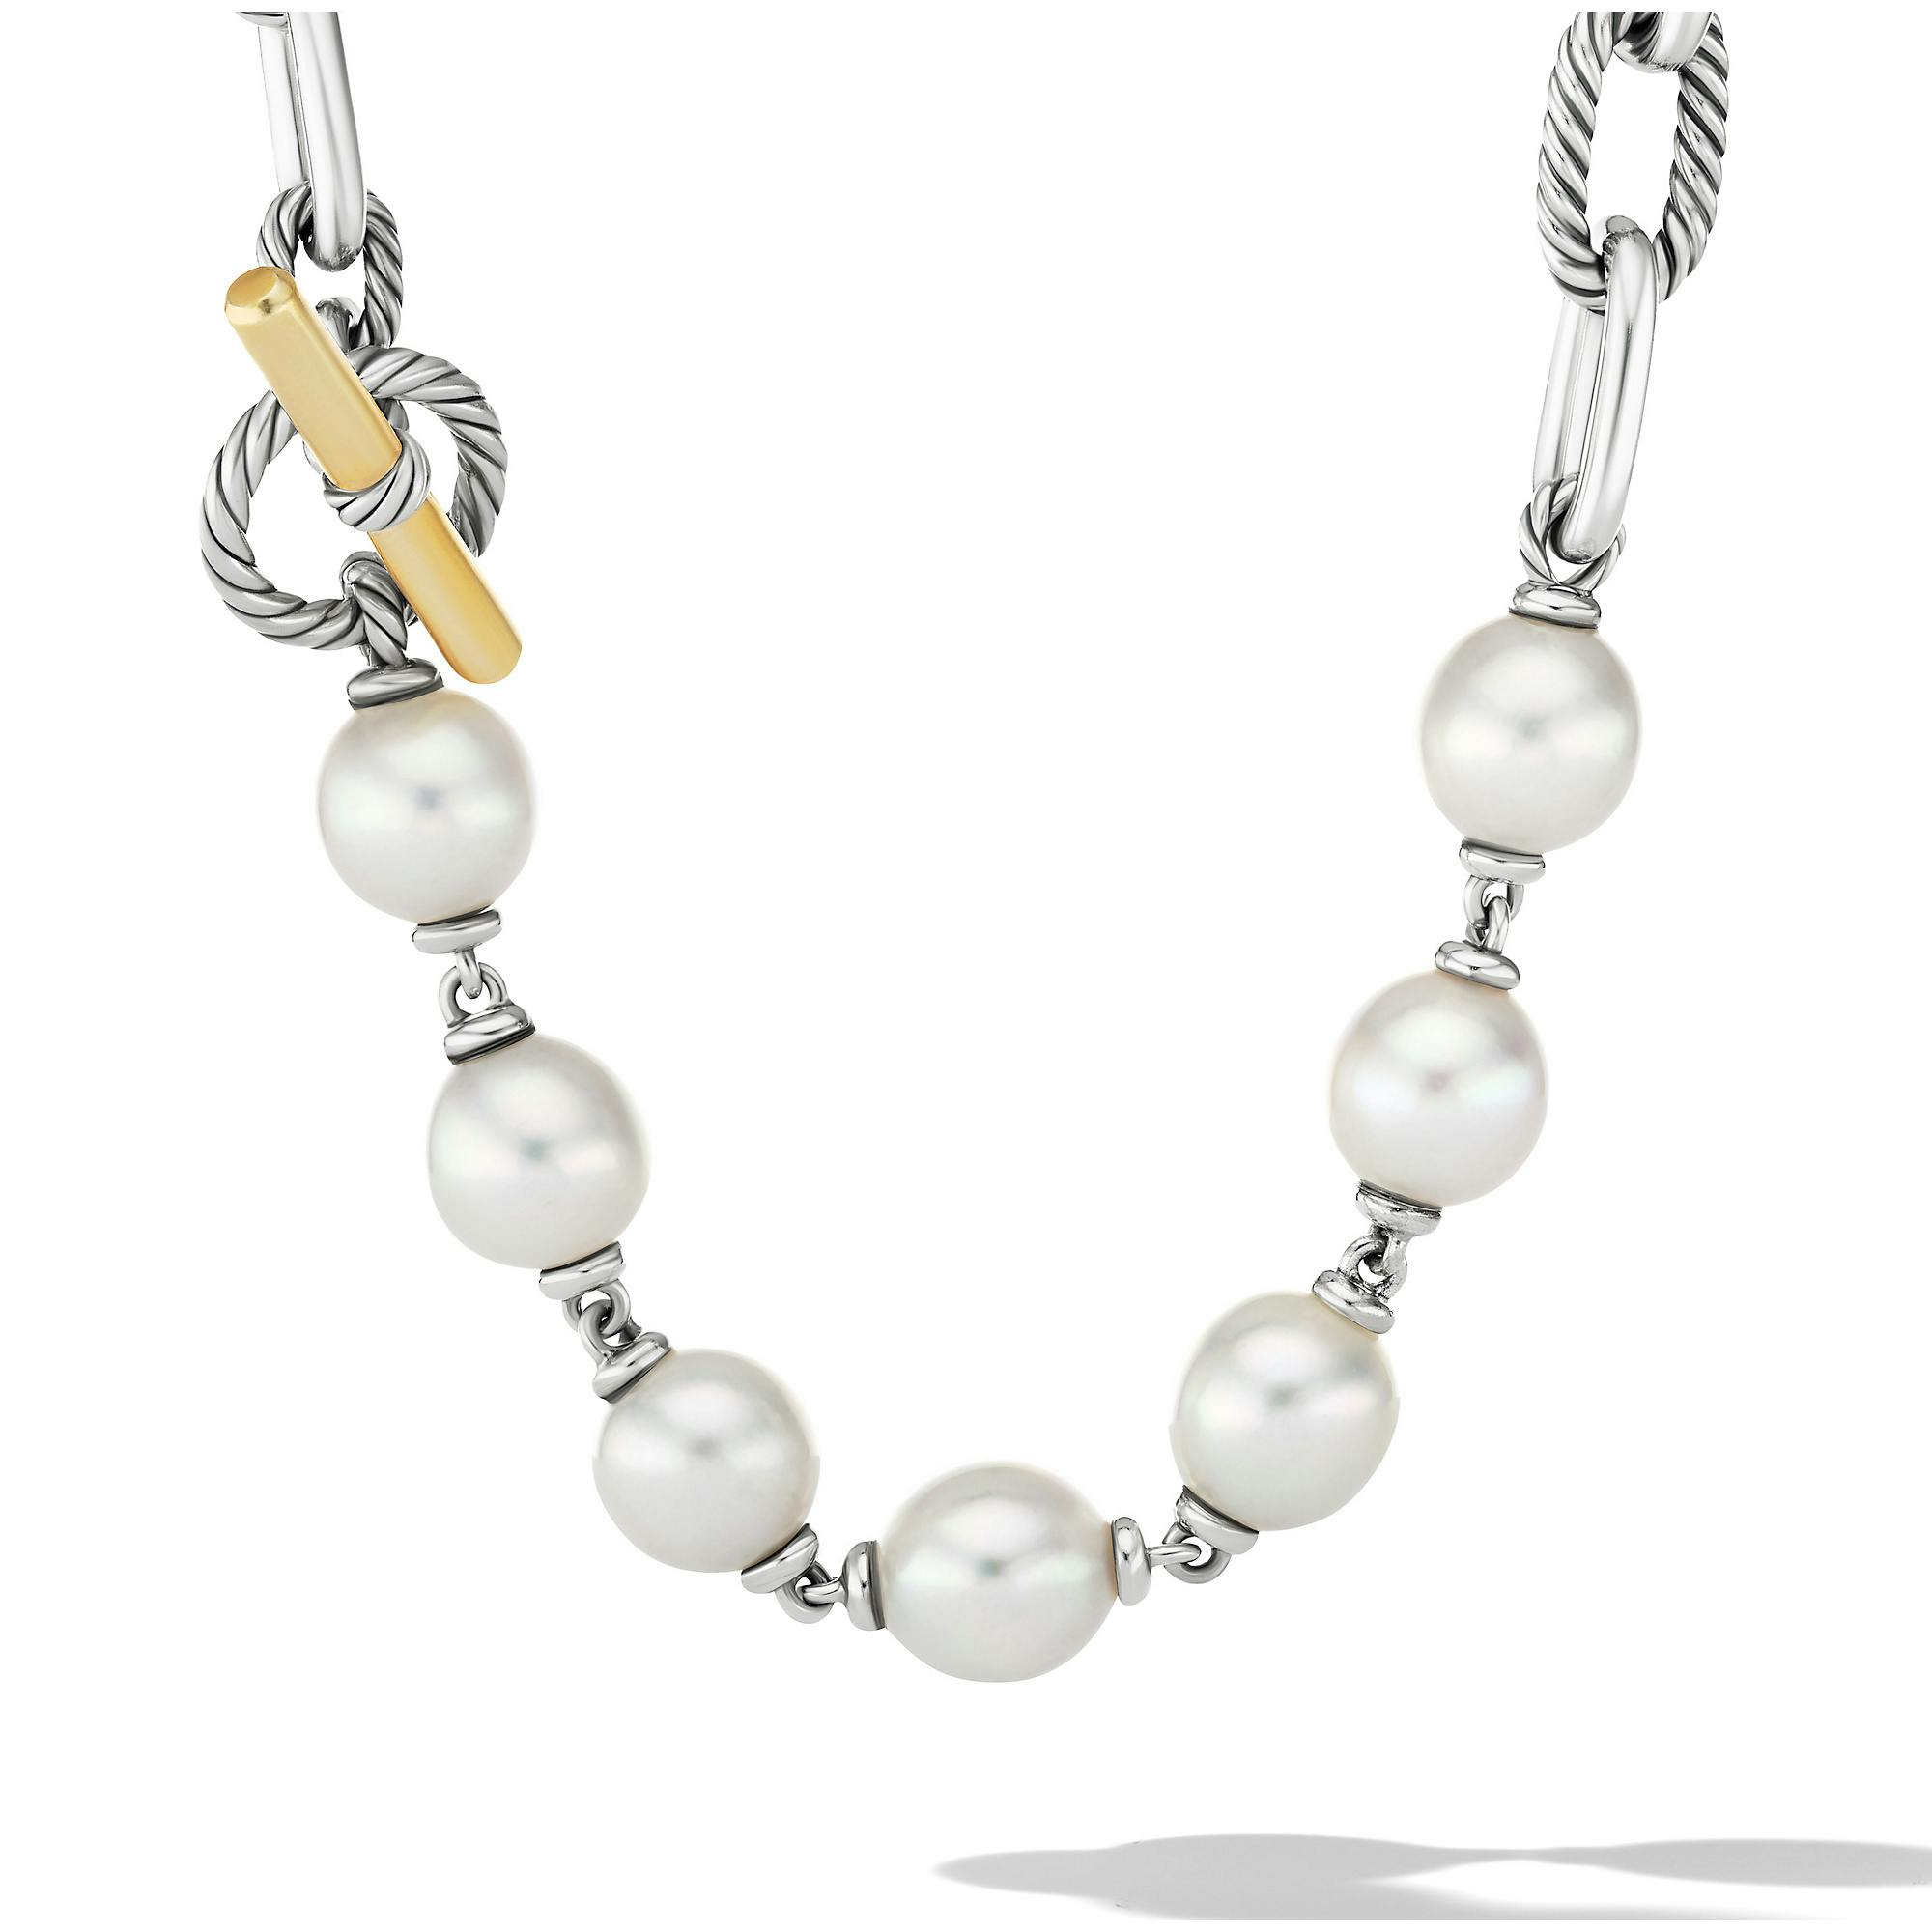 David Yurman DY Madison Pearl Chain Necklace in Sterling Silver with 18k Yellow Gold Toggle Clasp, 18 inches